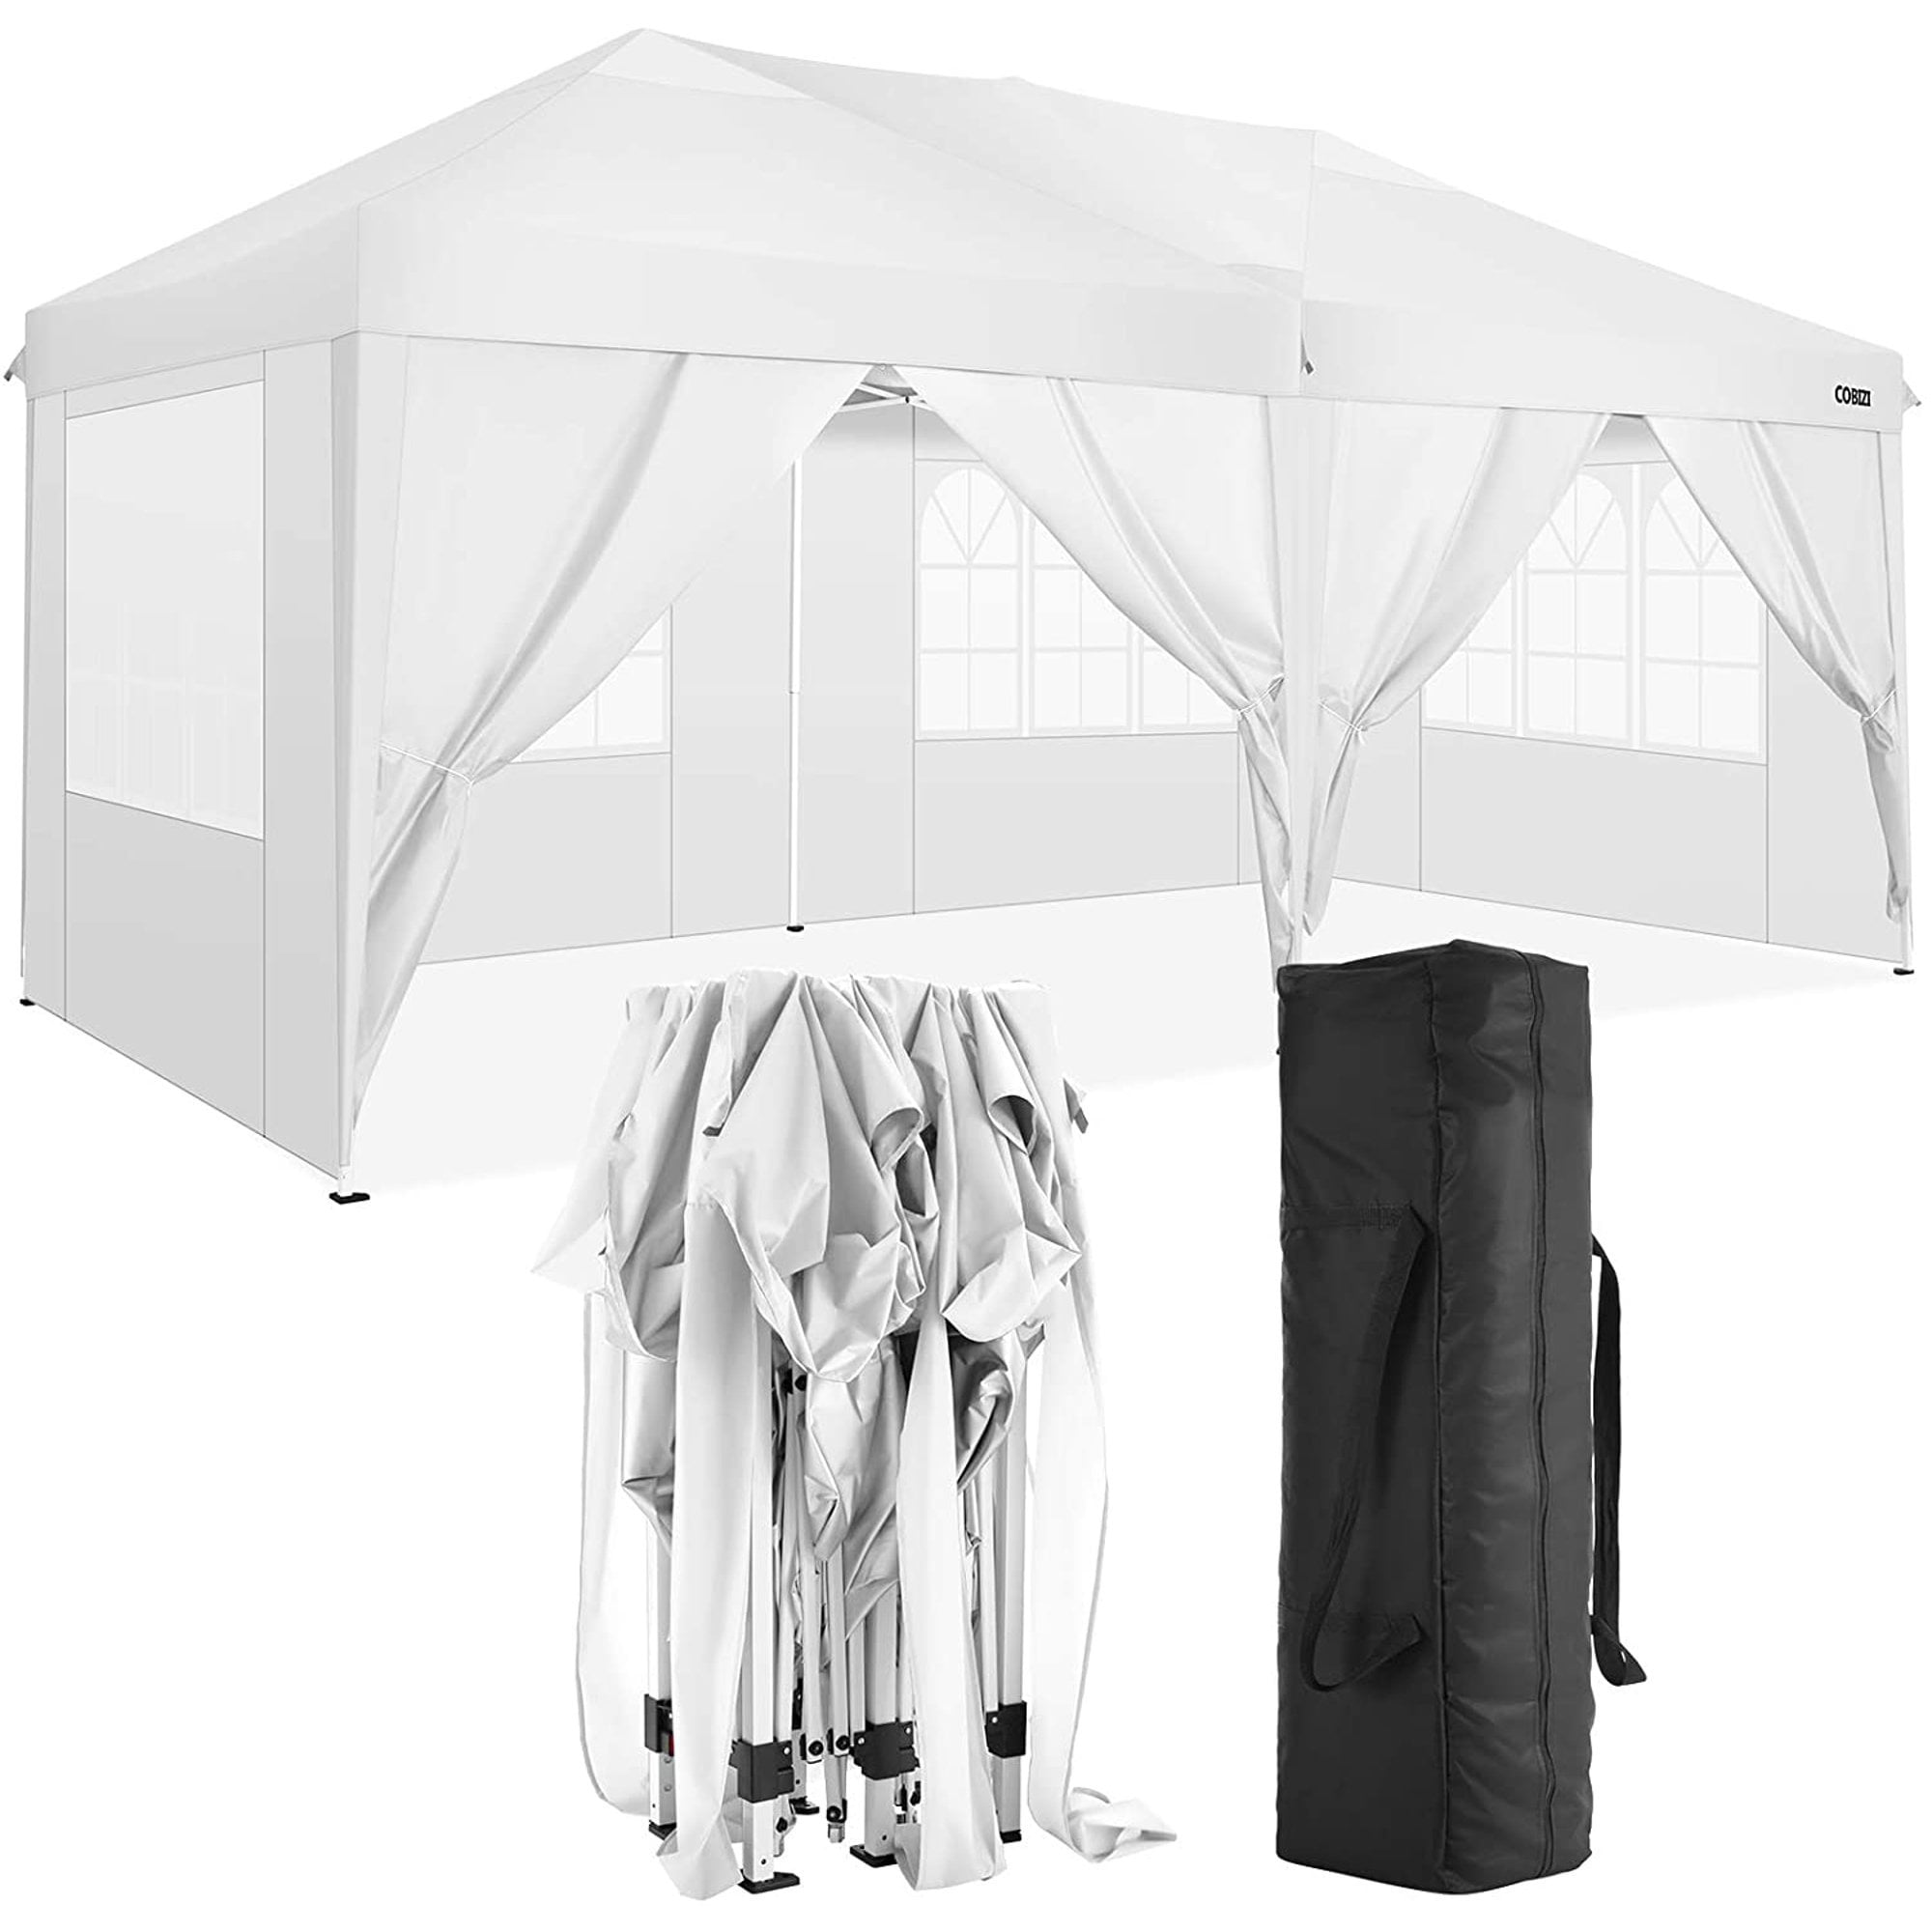 was vruchten Tenslotte 10' x 20' EZ Pop Up Canopy Tent Party Tent Outdoor Event Instant Tent  Gazebo with 6 Removable Sidewalls and Carry Bag, White - Walmart.com